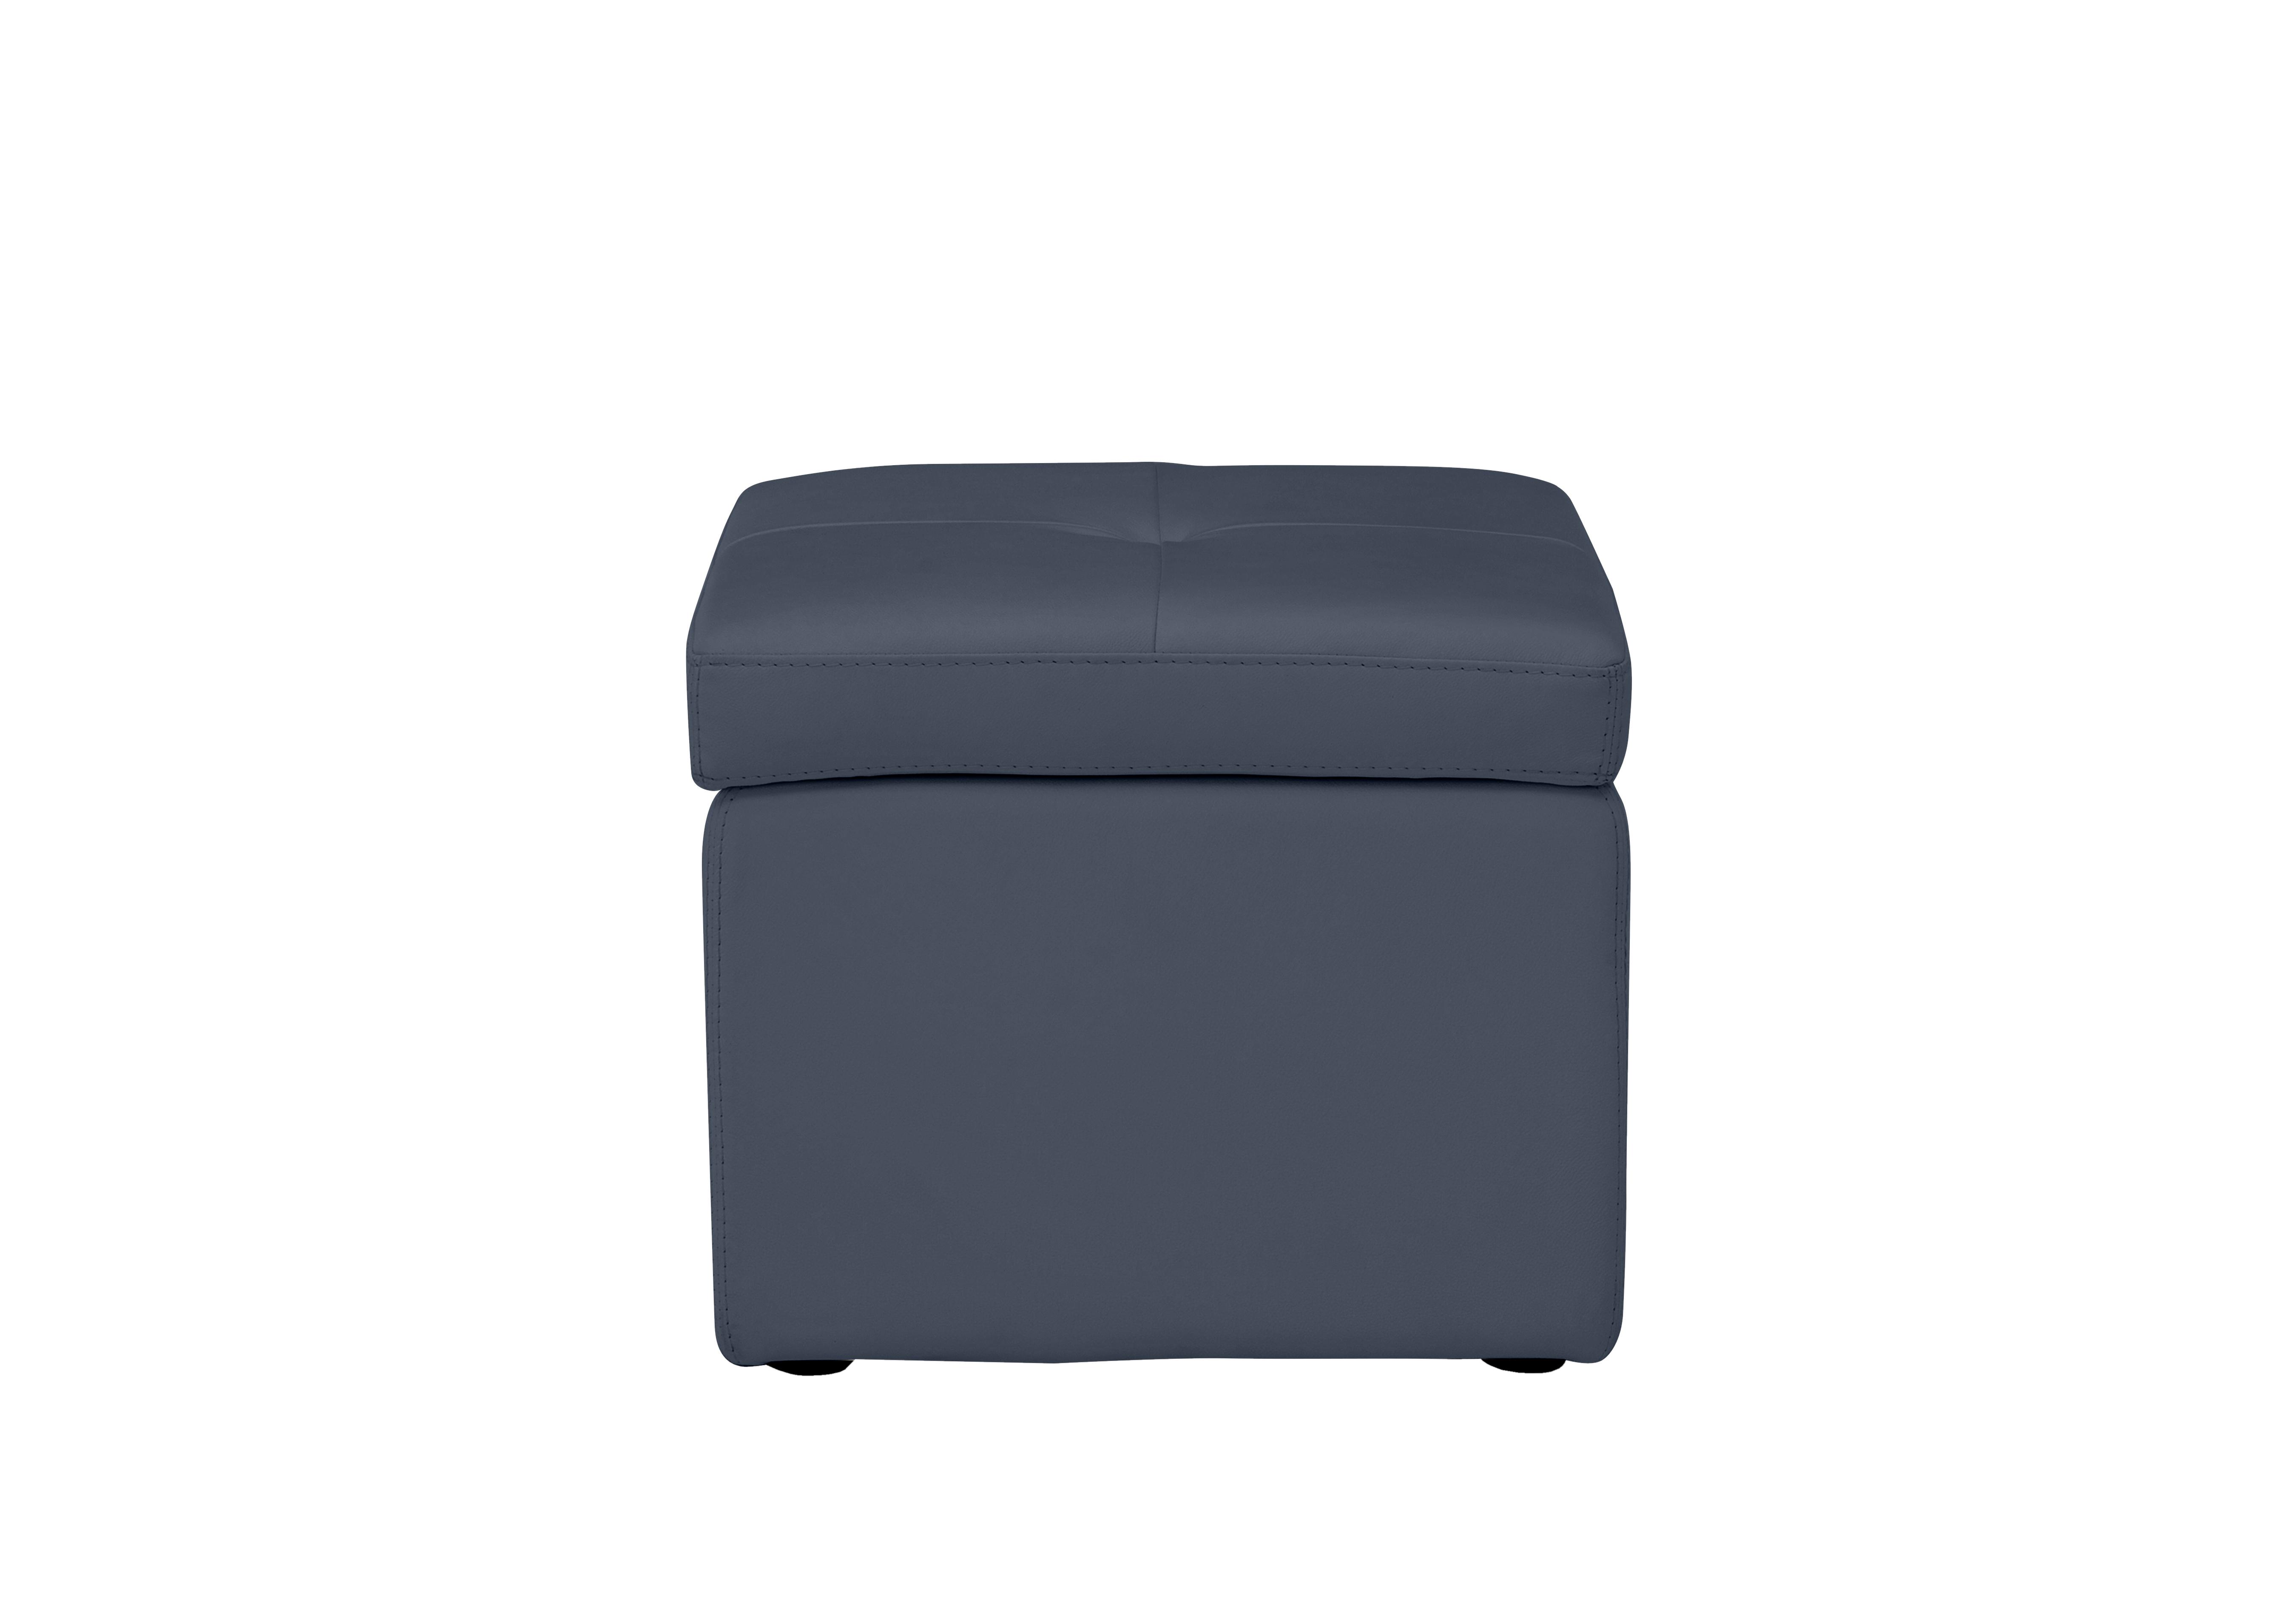 Easy Tray Leather Storage Footstool in Nc-313e Ocean Blue on Furniture Village